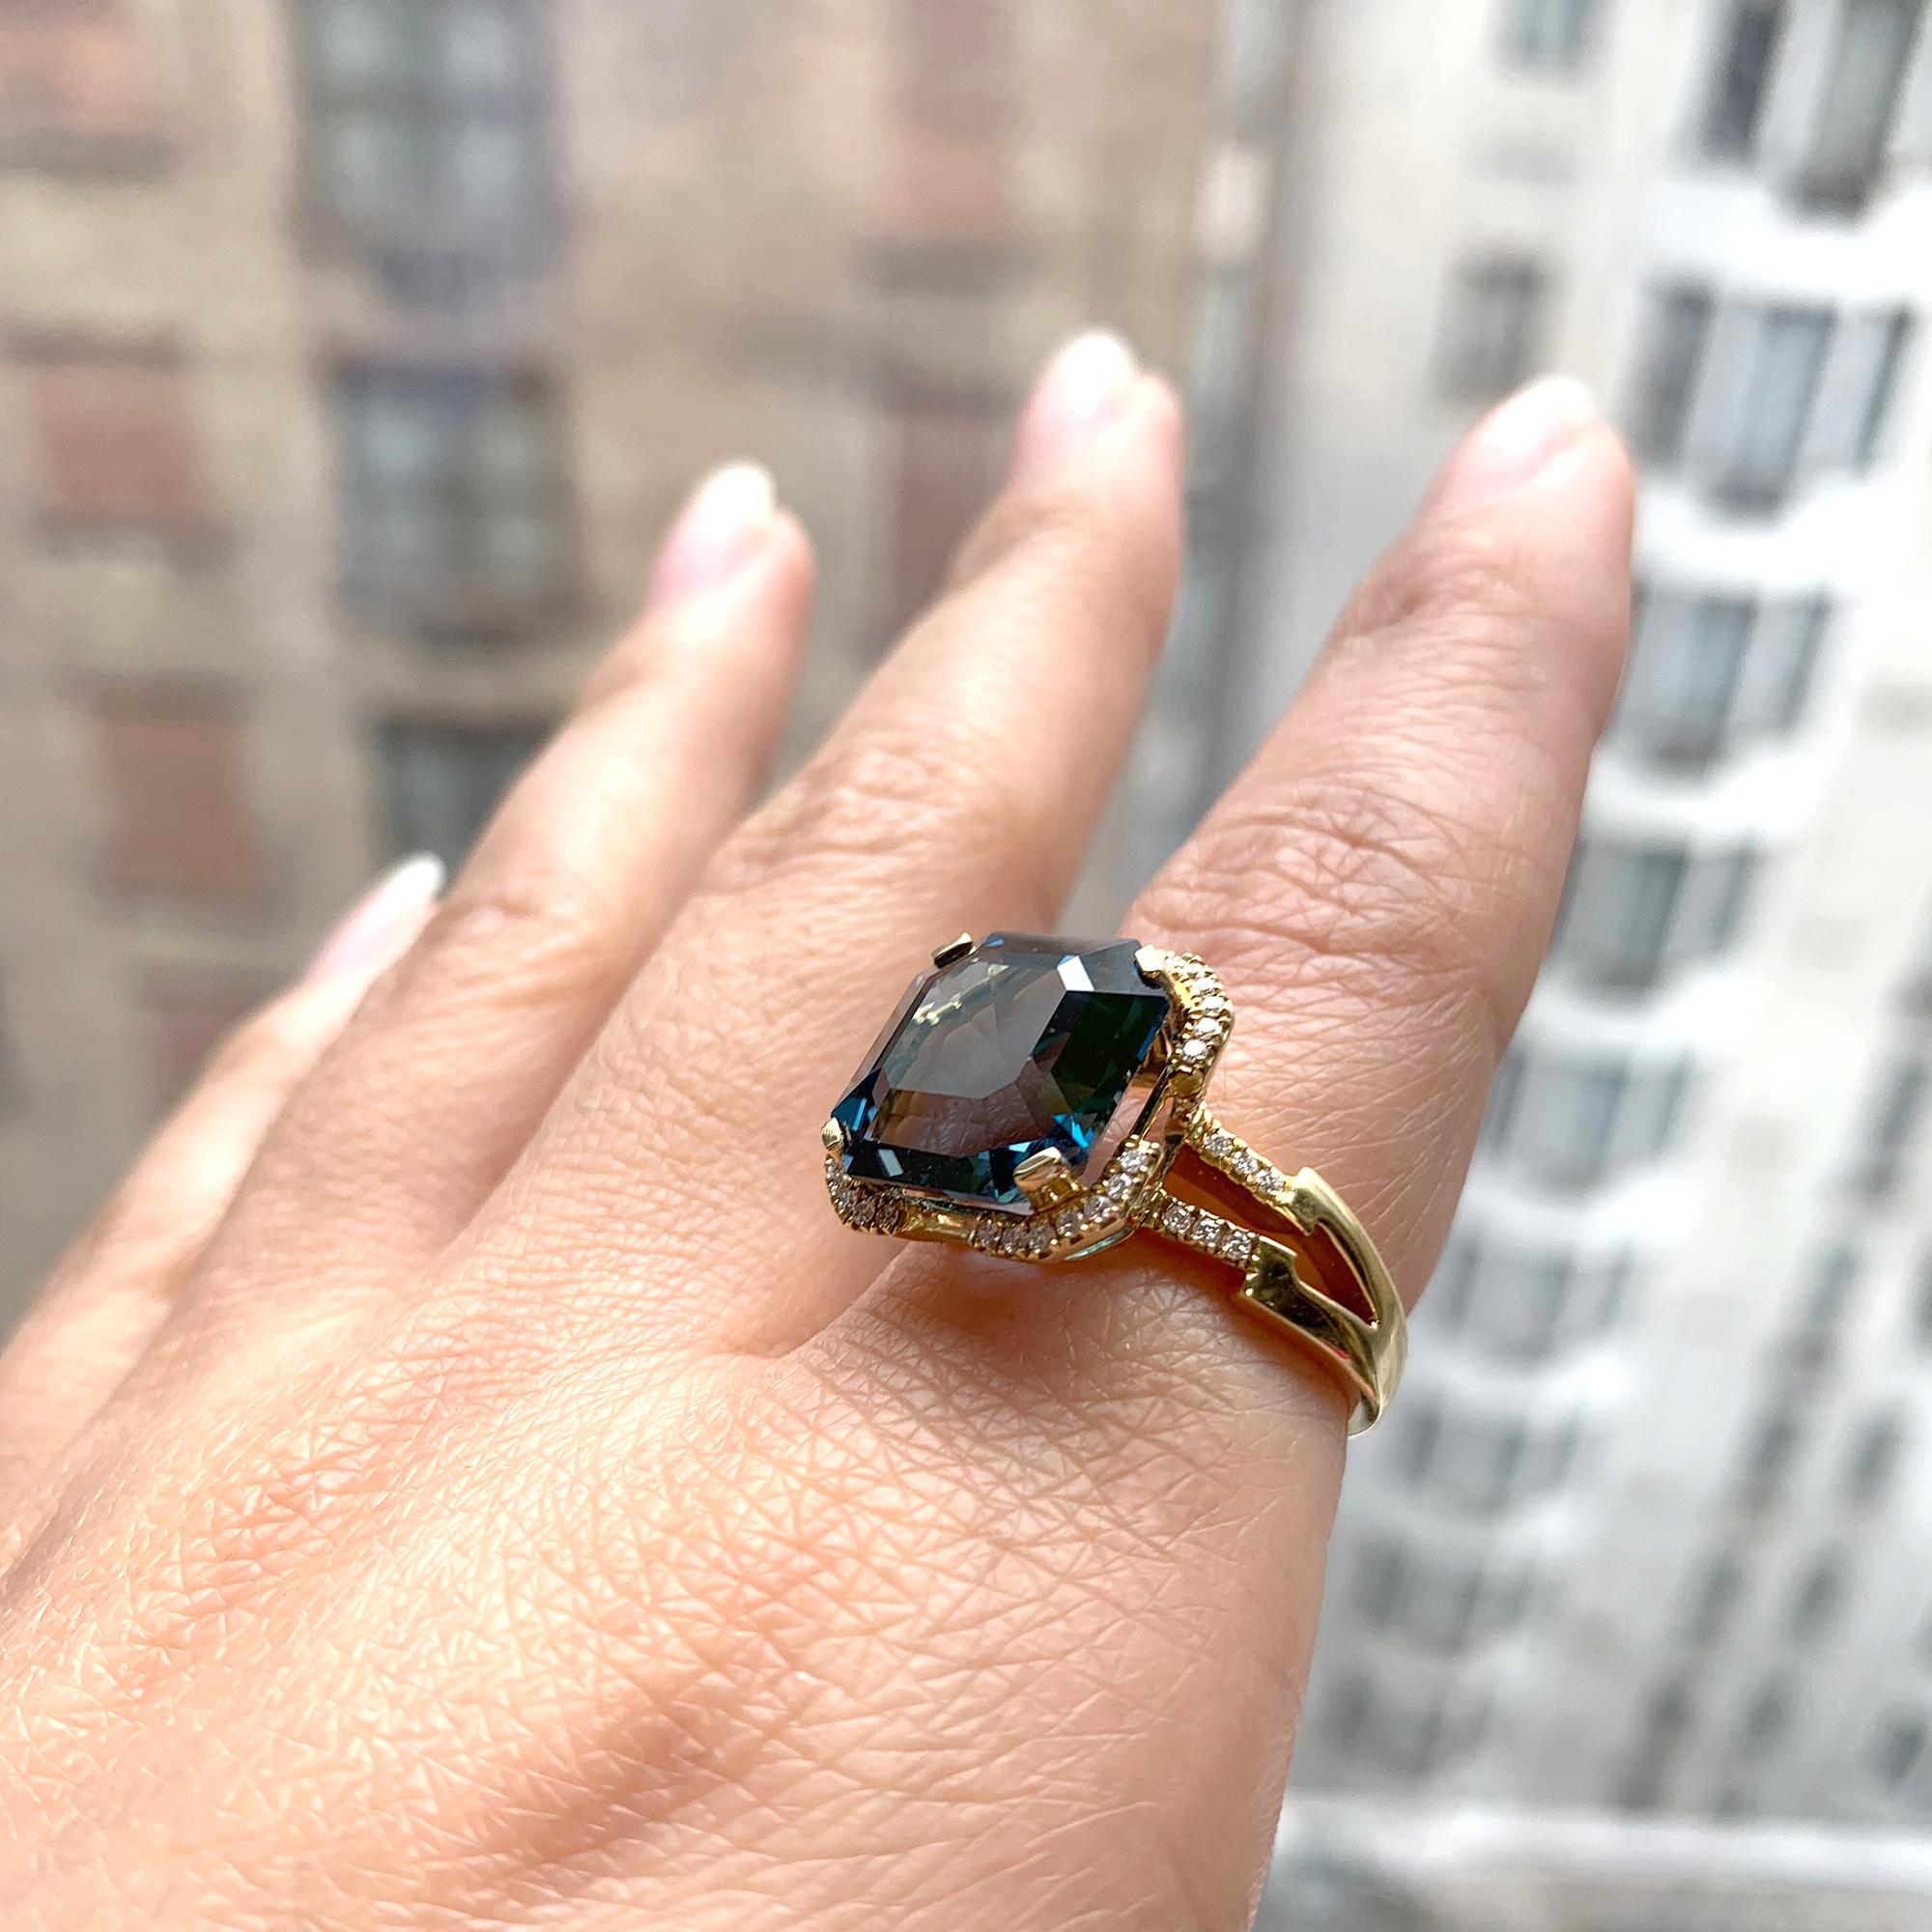 Elegance meets sophistication with our London Blue Topaz Emerald Cut Ring from the 'Gossip' Collection. Set in lustrous 18K yellow gold, this exquisite piece showcases a mesmerizing emerald-cut London Blue Topaz. A sprinkle of dazzling diamonds adds